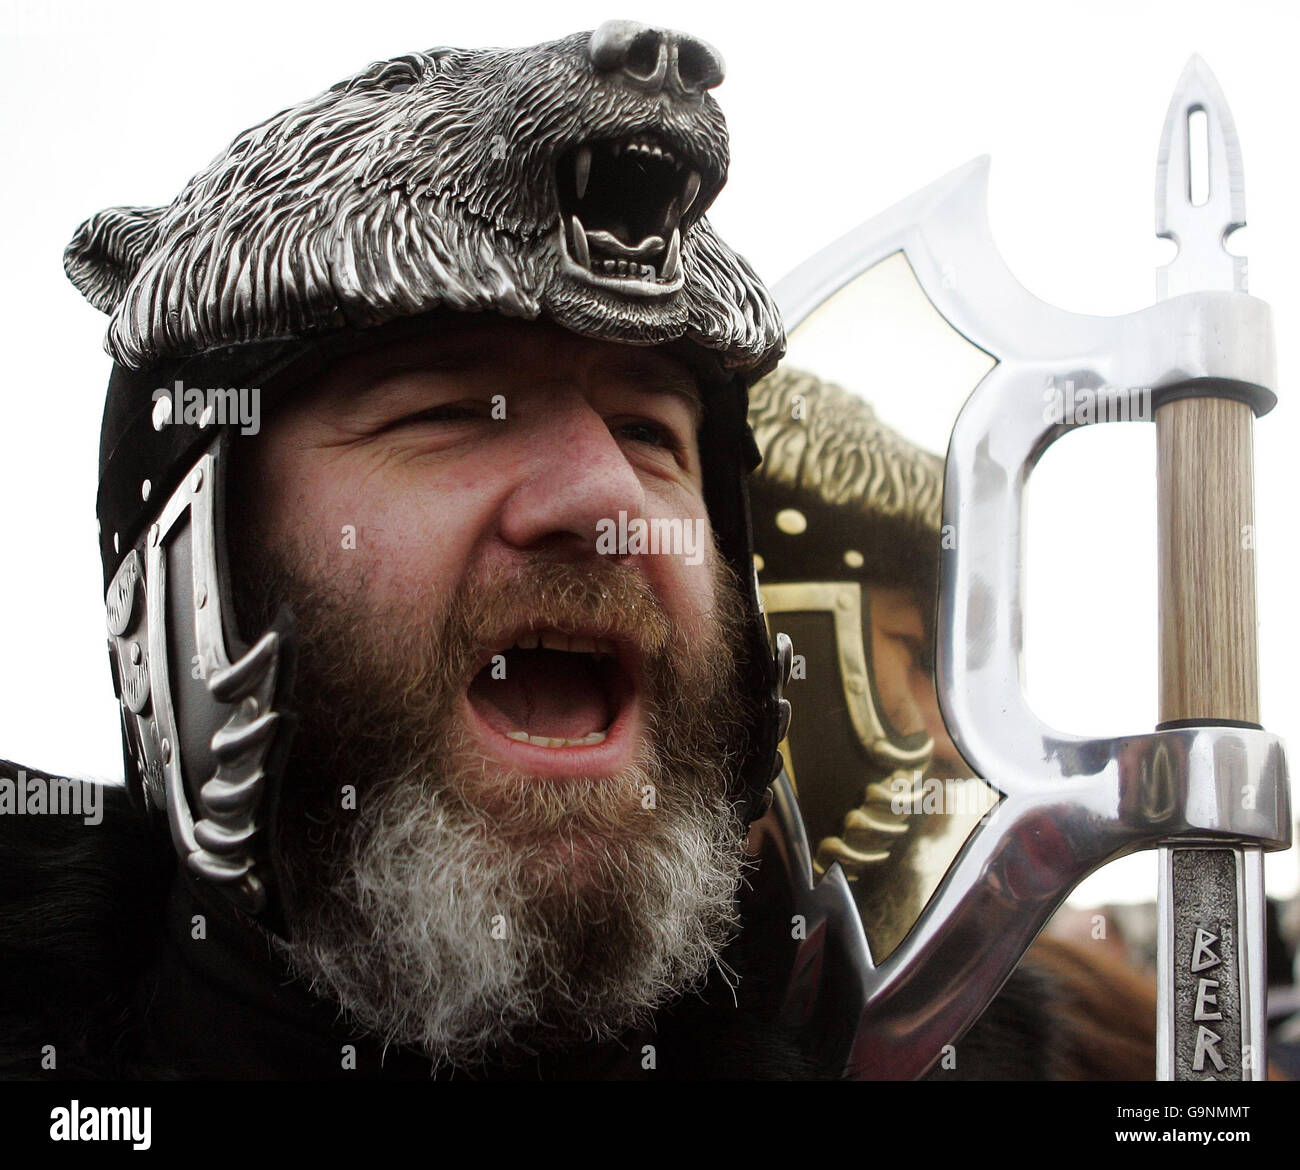 Alistair Carmichael, Liberal Democrat MP for Orkney and Shetland, marches through the streets of Lerwick, Shetland, during Up Helly Aa 2007. Stock Photo